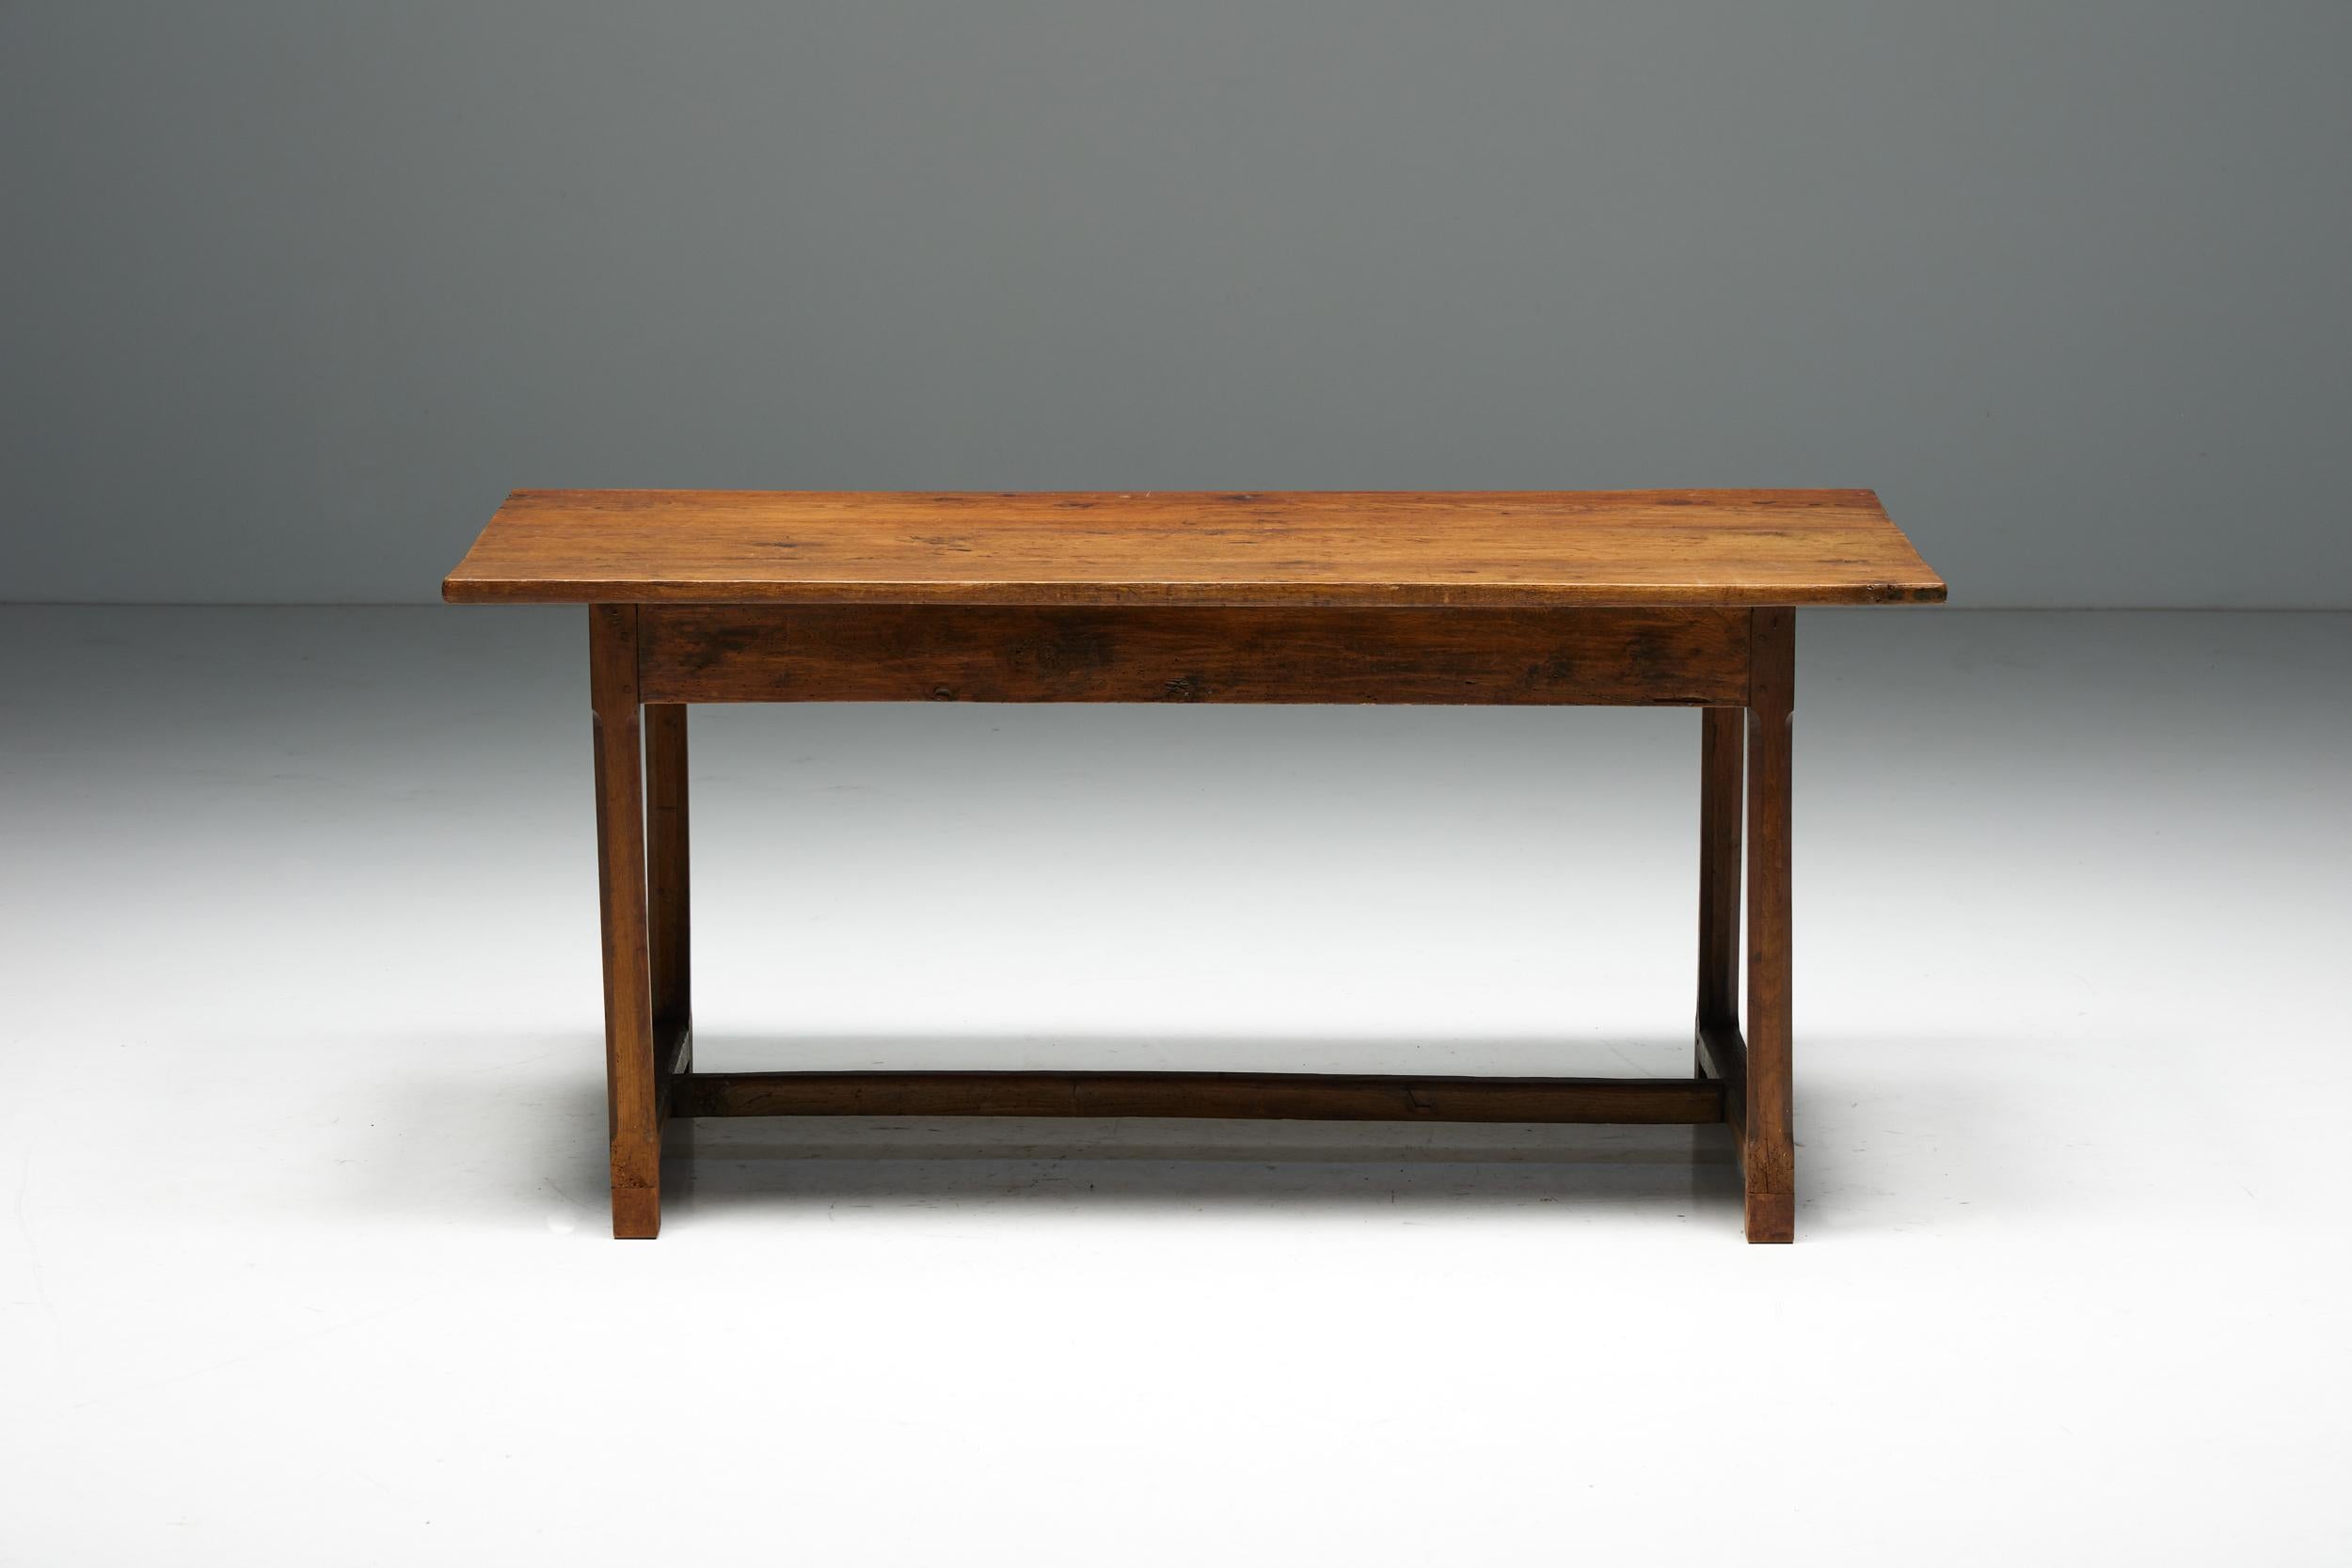 Wooden Desk; Writing Table; France; 19th Century Design; Art Populaire; Rustic; Monoxylite; Writing Desk; Table; France; Wabi Sabi; Naive; Folk Art; Travail Populaire;

19th-century writing table or desk, a true testament to the rich heritage of